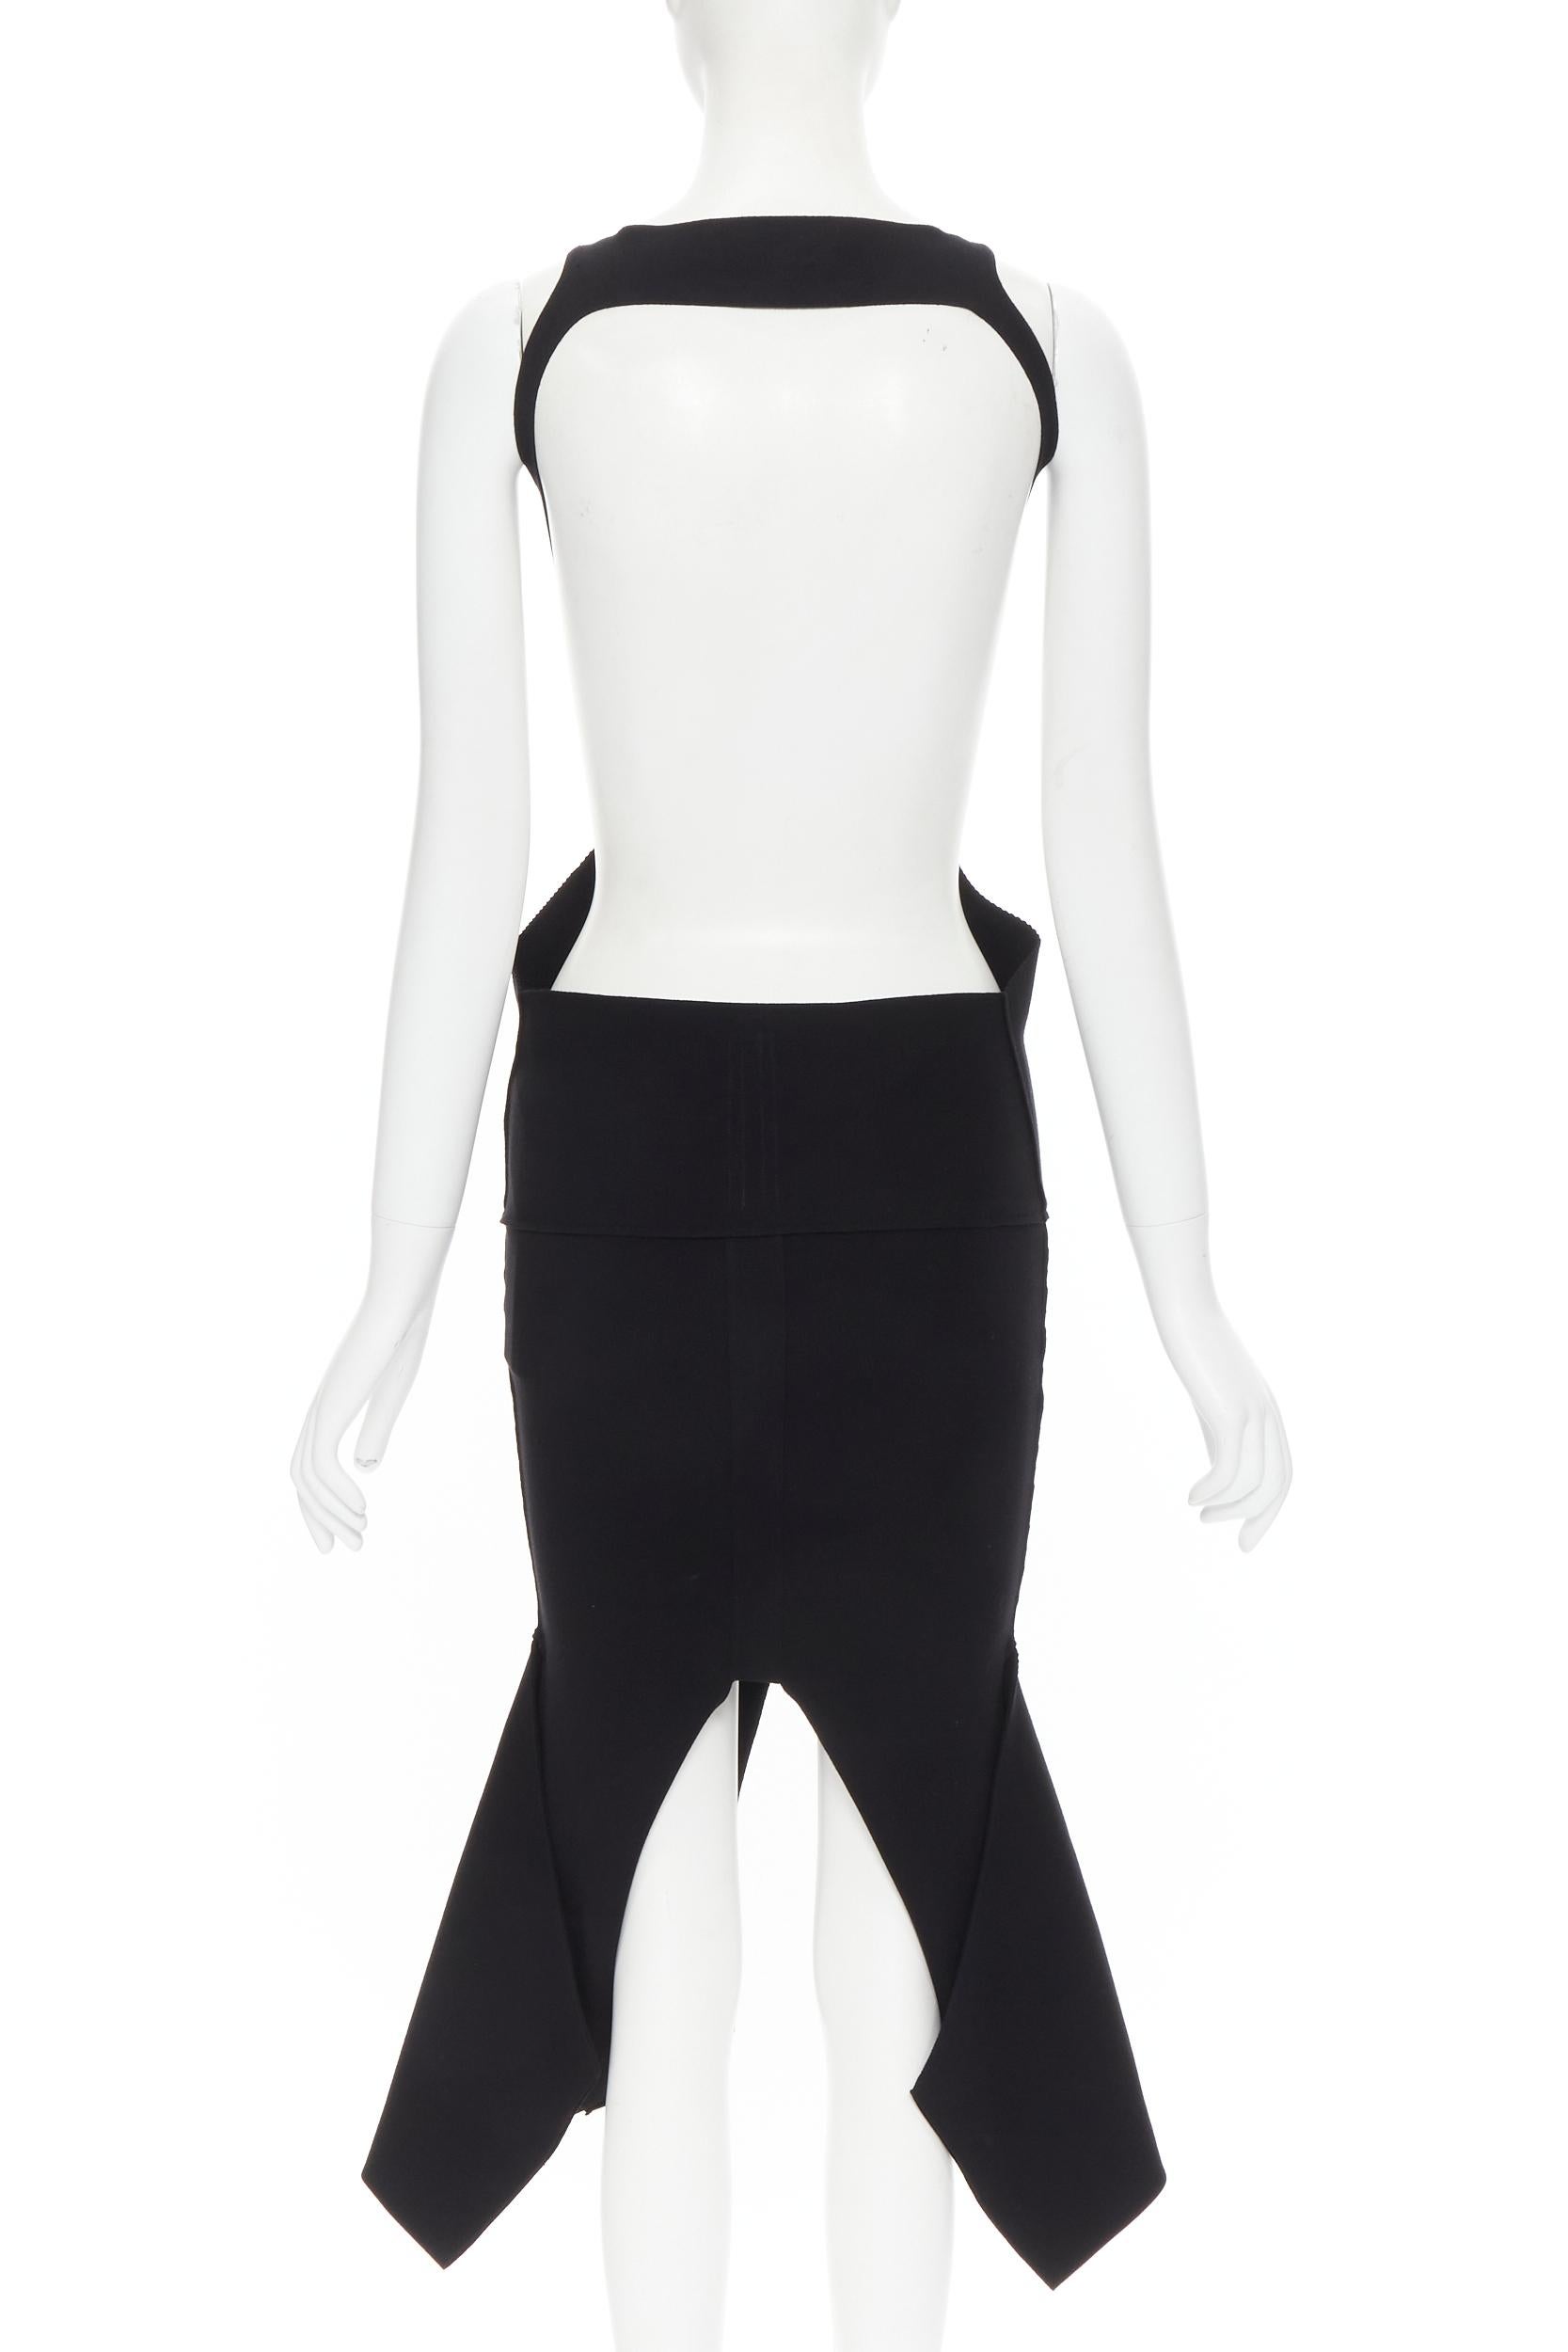 new RICK OEWNS Tecualt 2020 Runway black cut out open back dress S 
Reference: TGAS/B01342 
Brand: Rick Owens 
Designer: Rick Owens 
Material: Viscose 
Color: Black 
Pattern: Solid 
Extra Detail: Sling Double top. Worn rusched at waist over skirt as